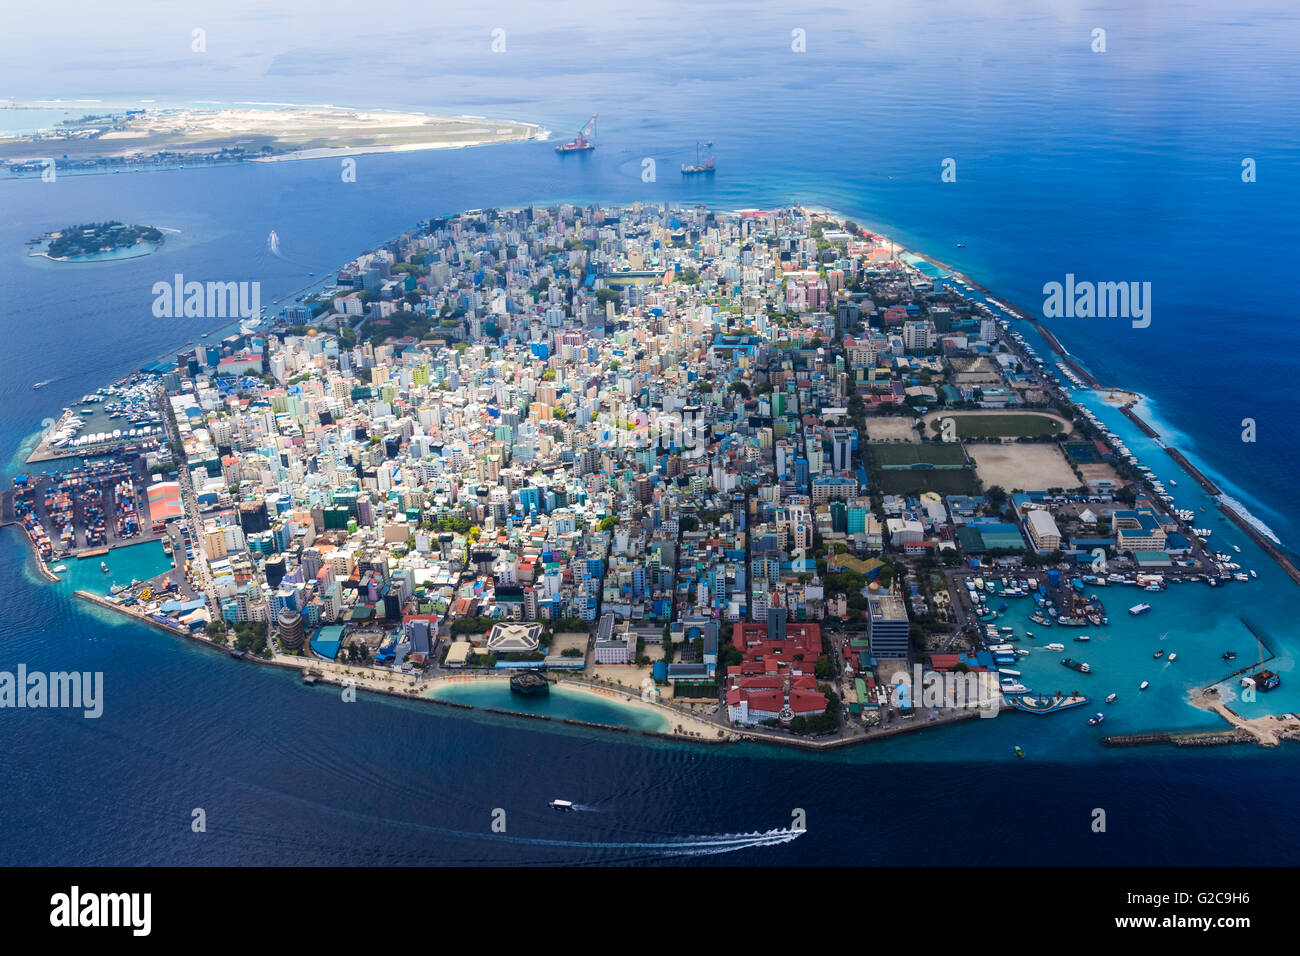 Male, Maldivian capital city from above. Aerial view Male Stock Photo